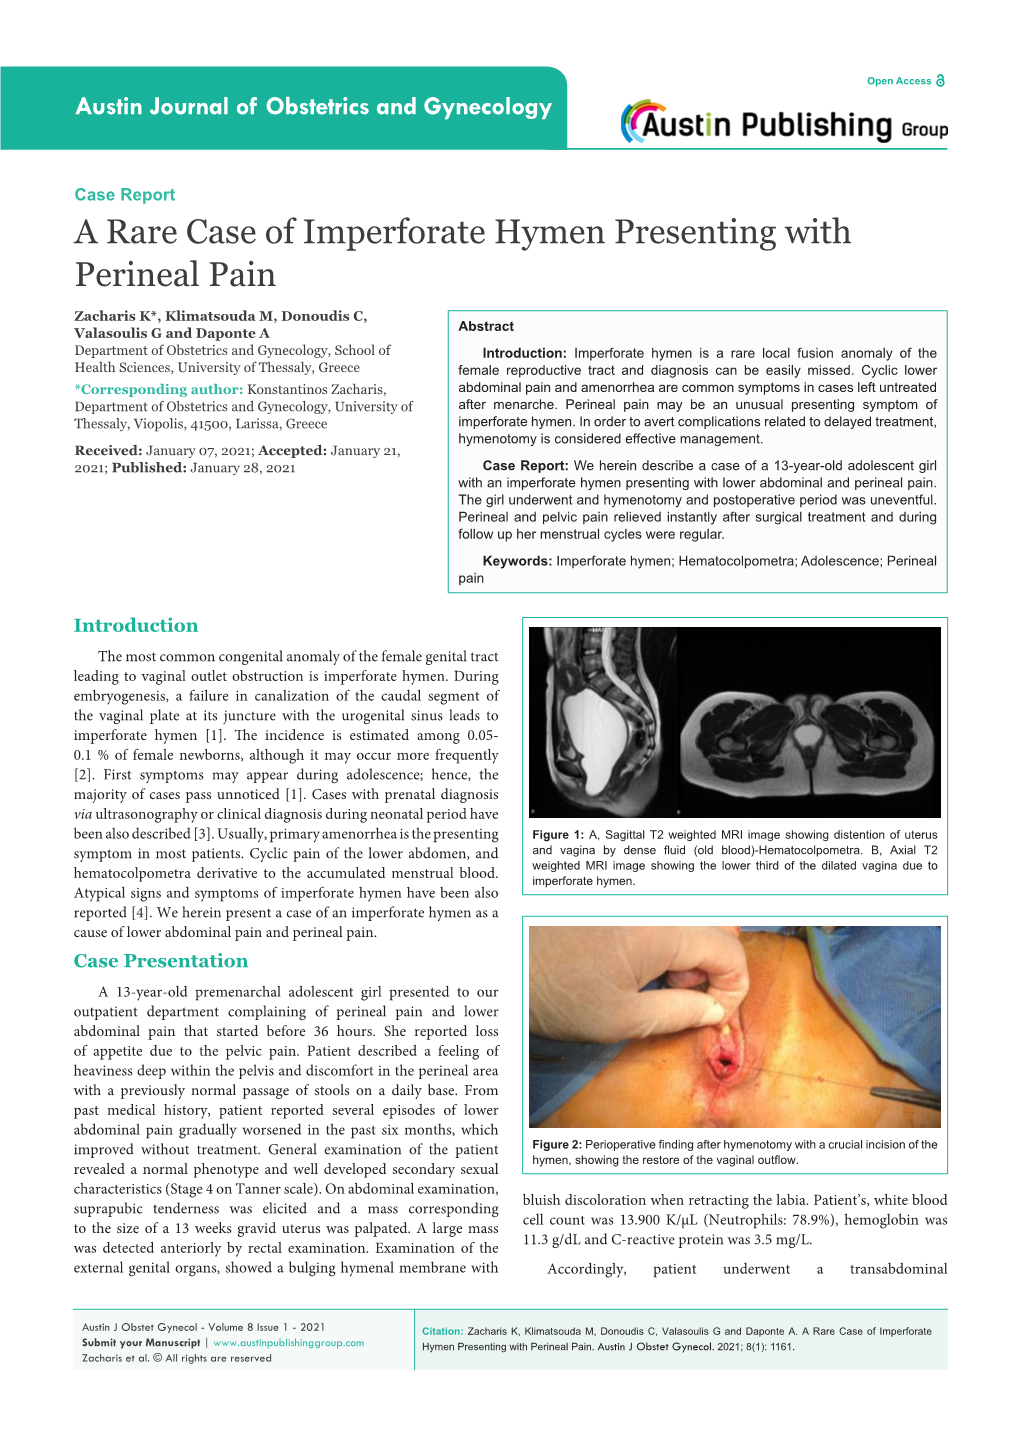 A Rare Case of Imperforate Hymen Presenting with Perineal Pain